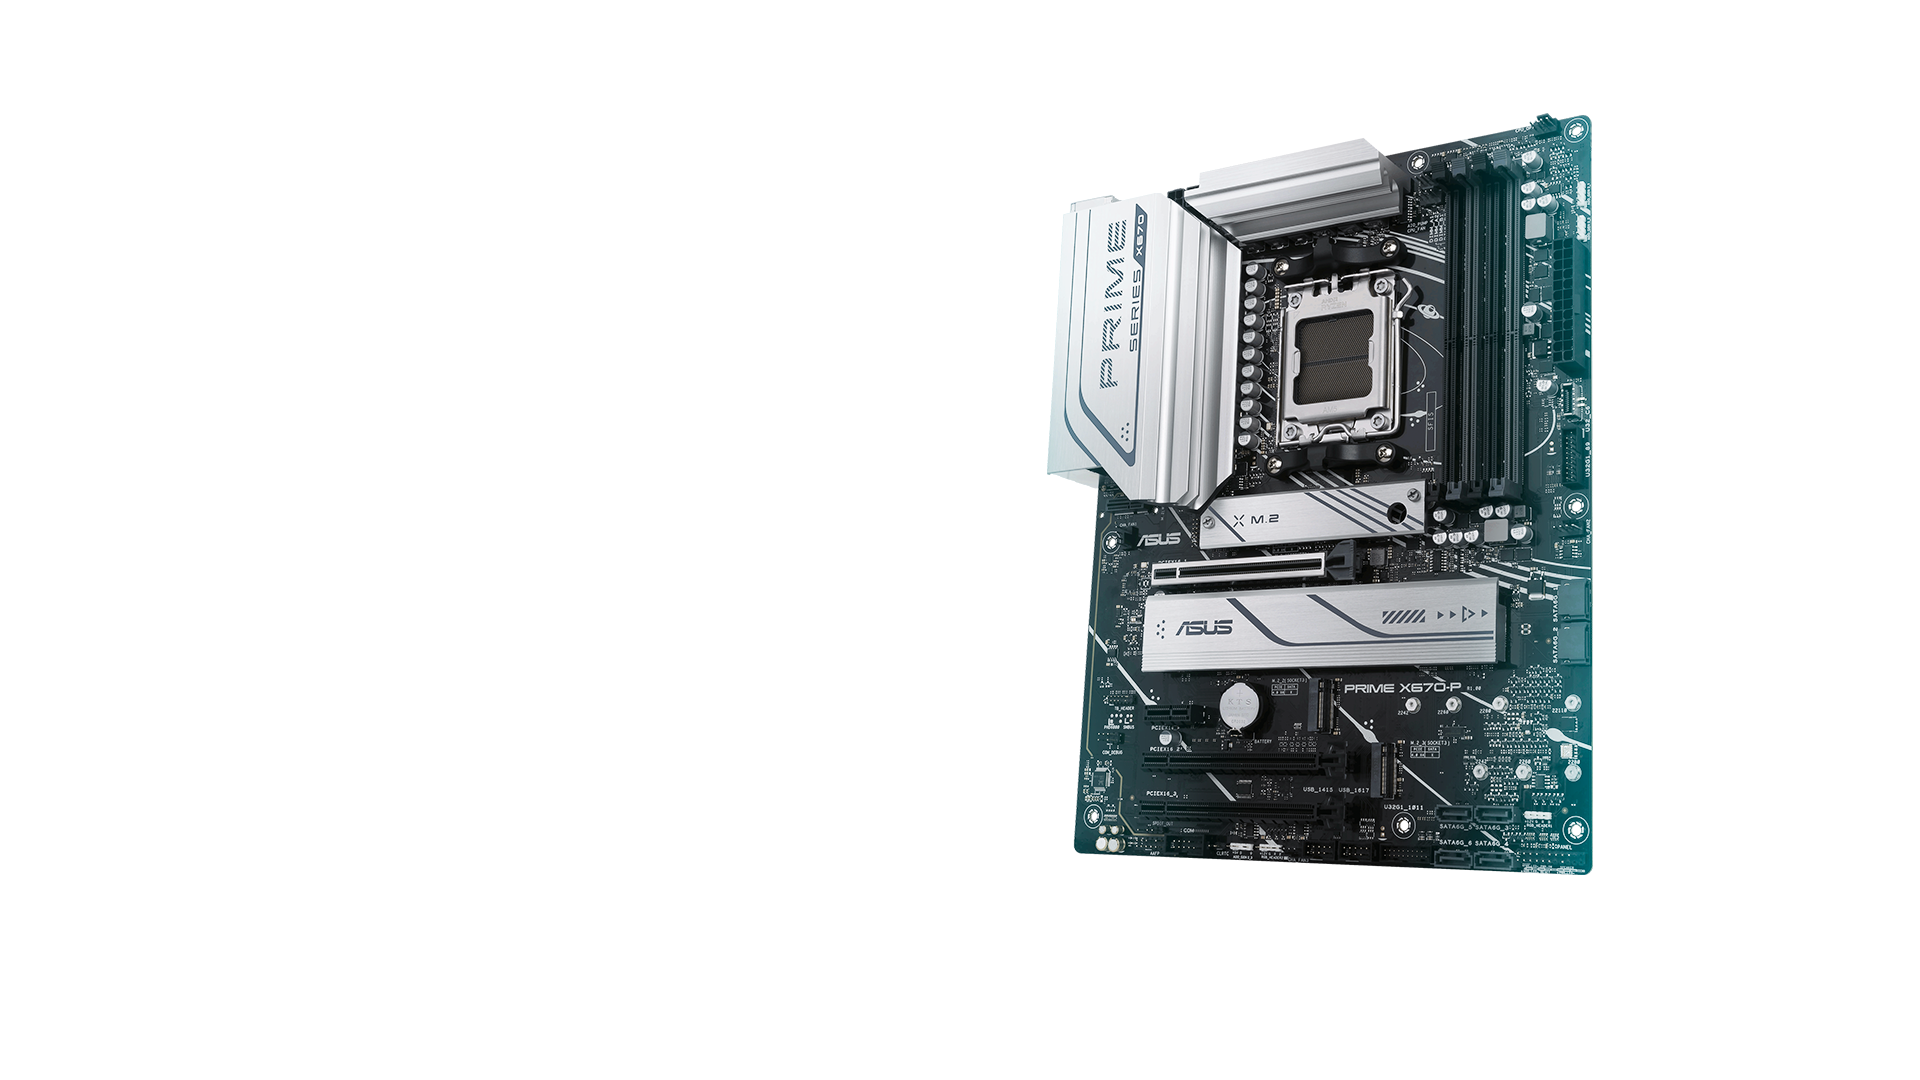 PRIME X670-P provides users and PC DIY builders a range of performance tuning options via intuitive software and firmware features.